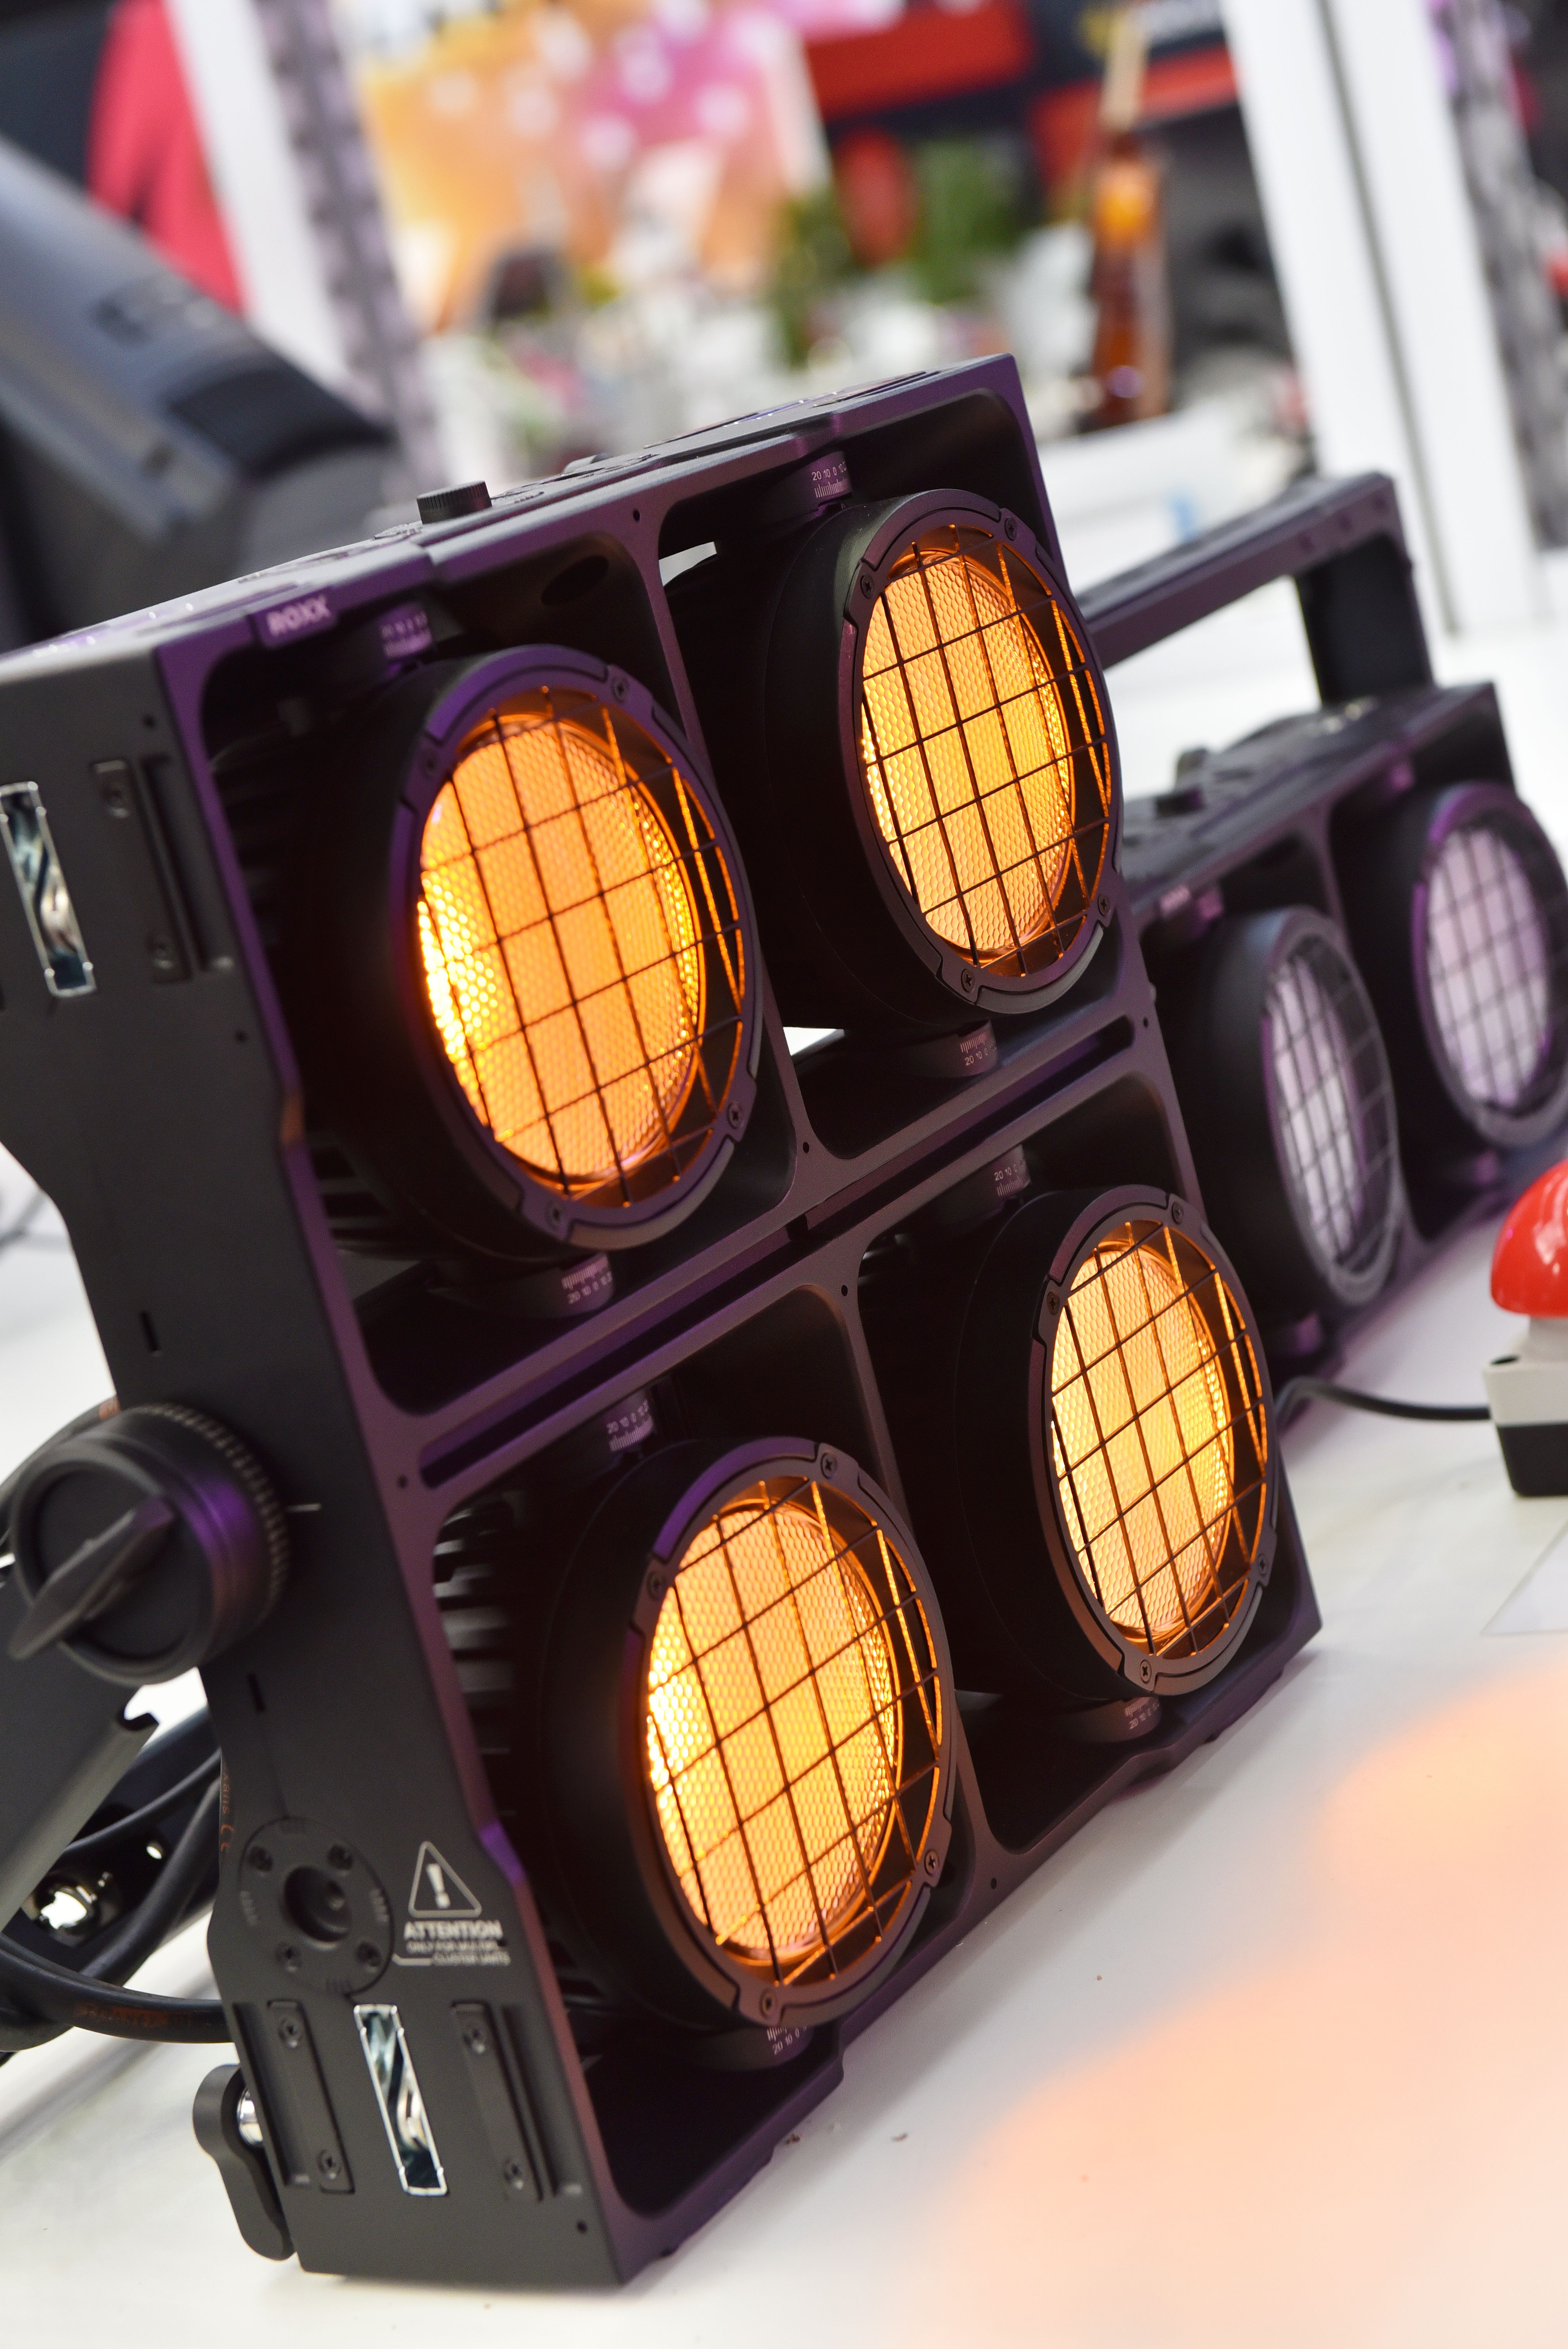 ROXX Cluster Blinder on show at the Innovation Gallery at PLASA Show